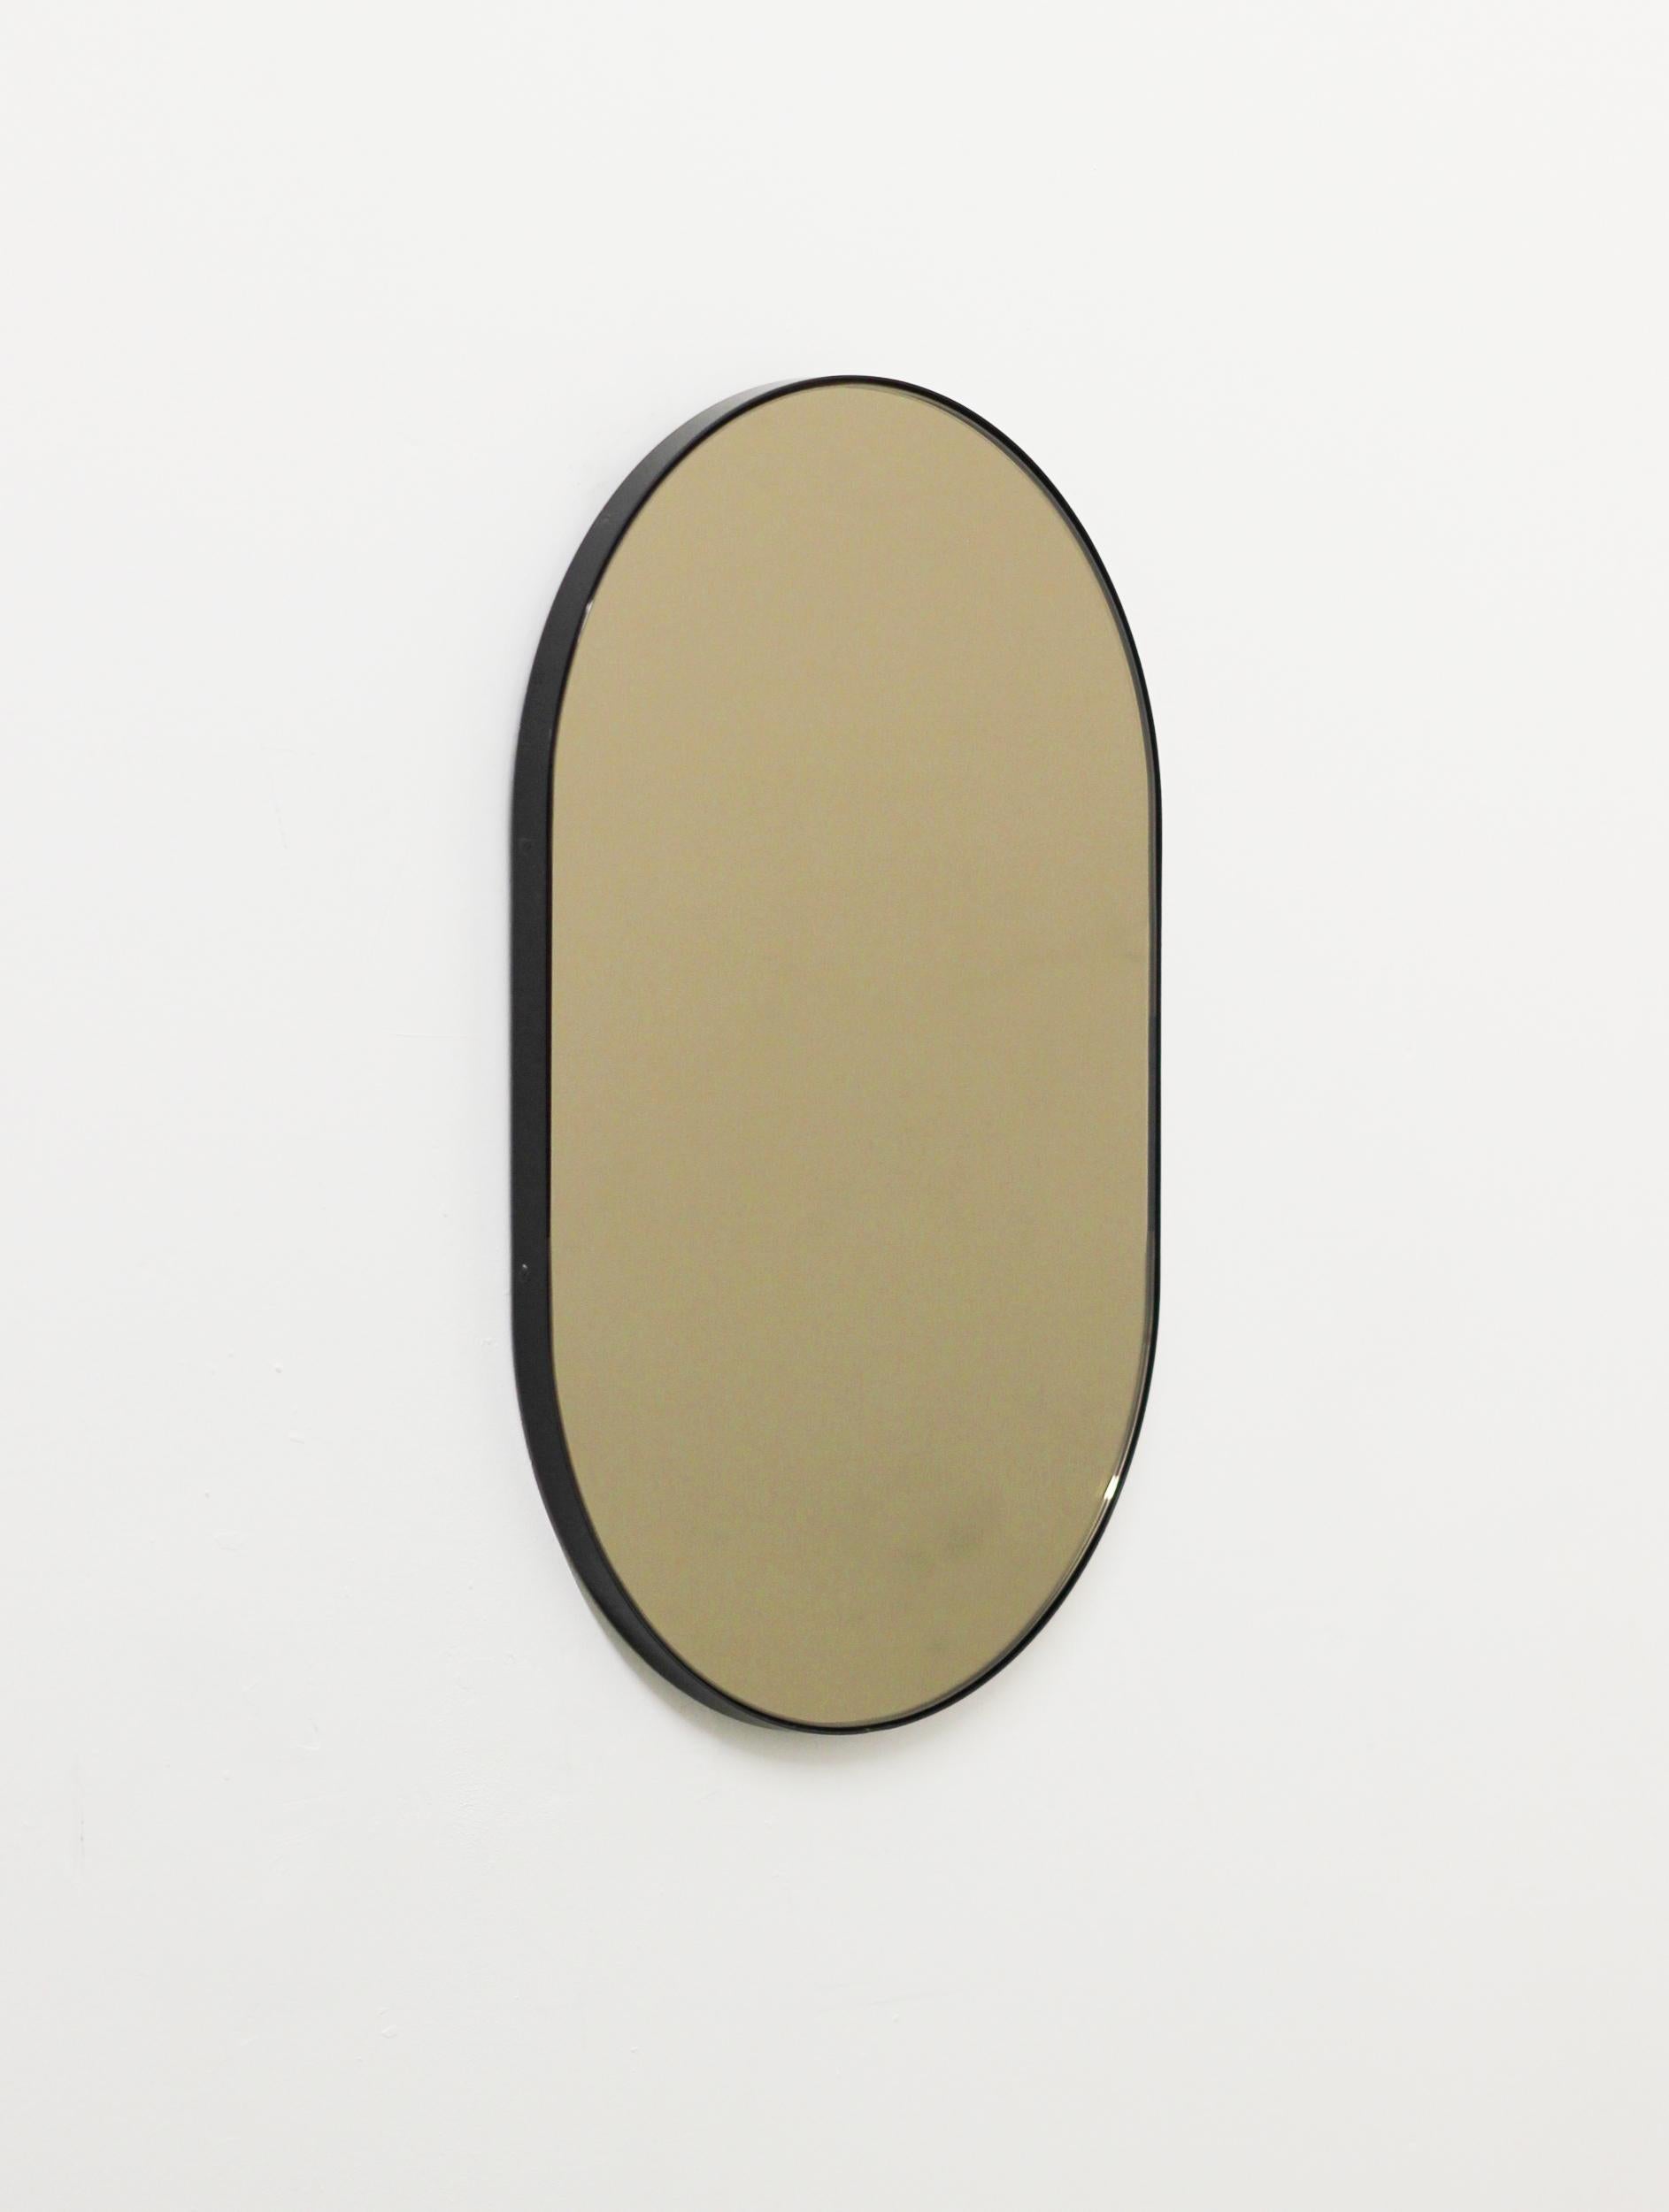 Modern handcrafted Capsula™ capsule / pill shaped bronze tinted mirror with an elegant black powder coated aluminium frame. Designed and made in London, UK.

Our mirrors are designed with an integrated French cleat (split batten) system that ensures